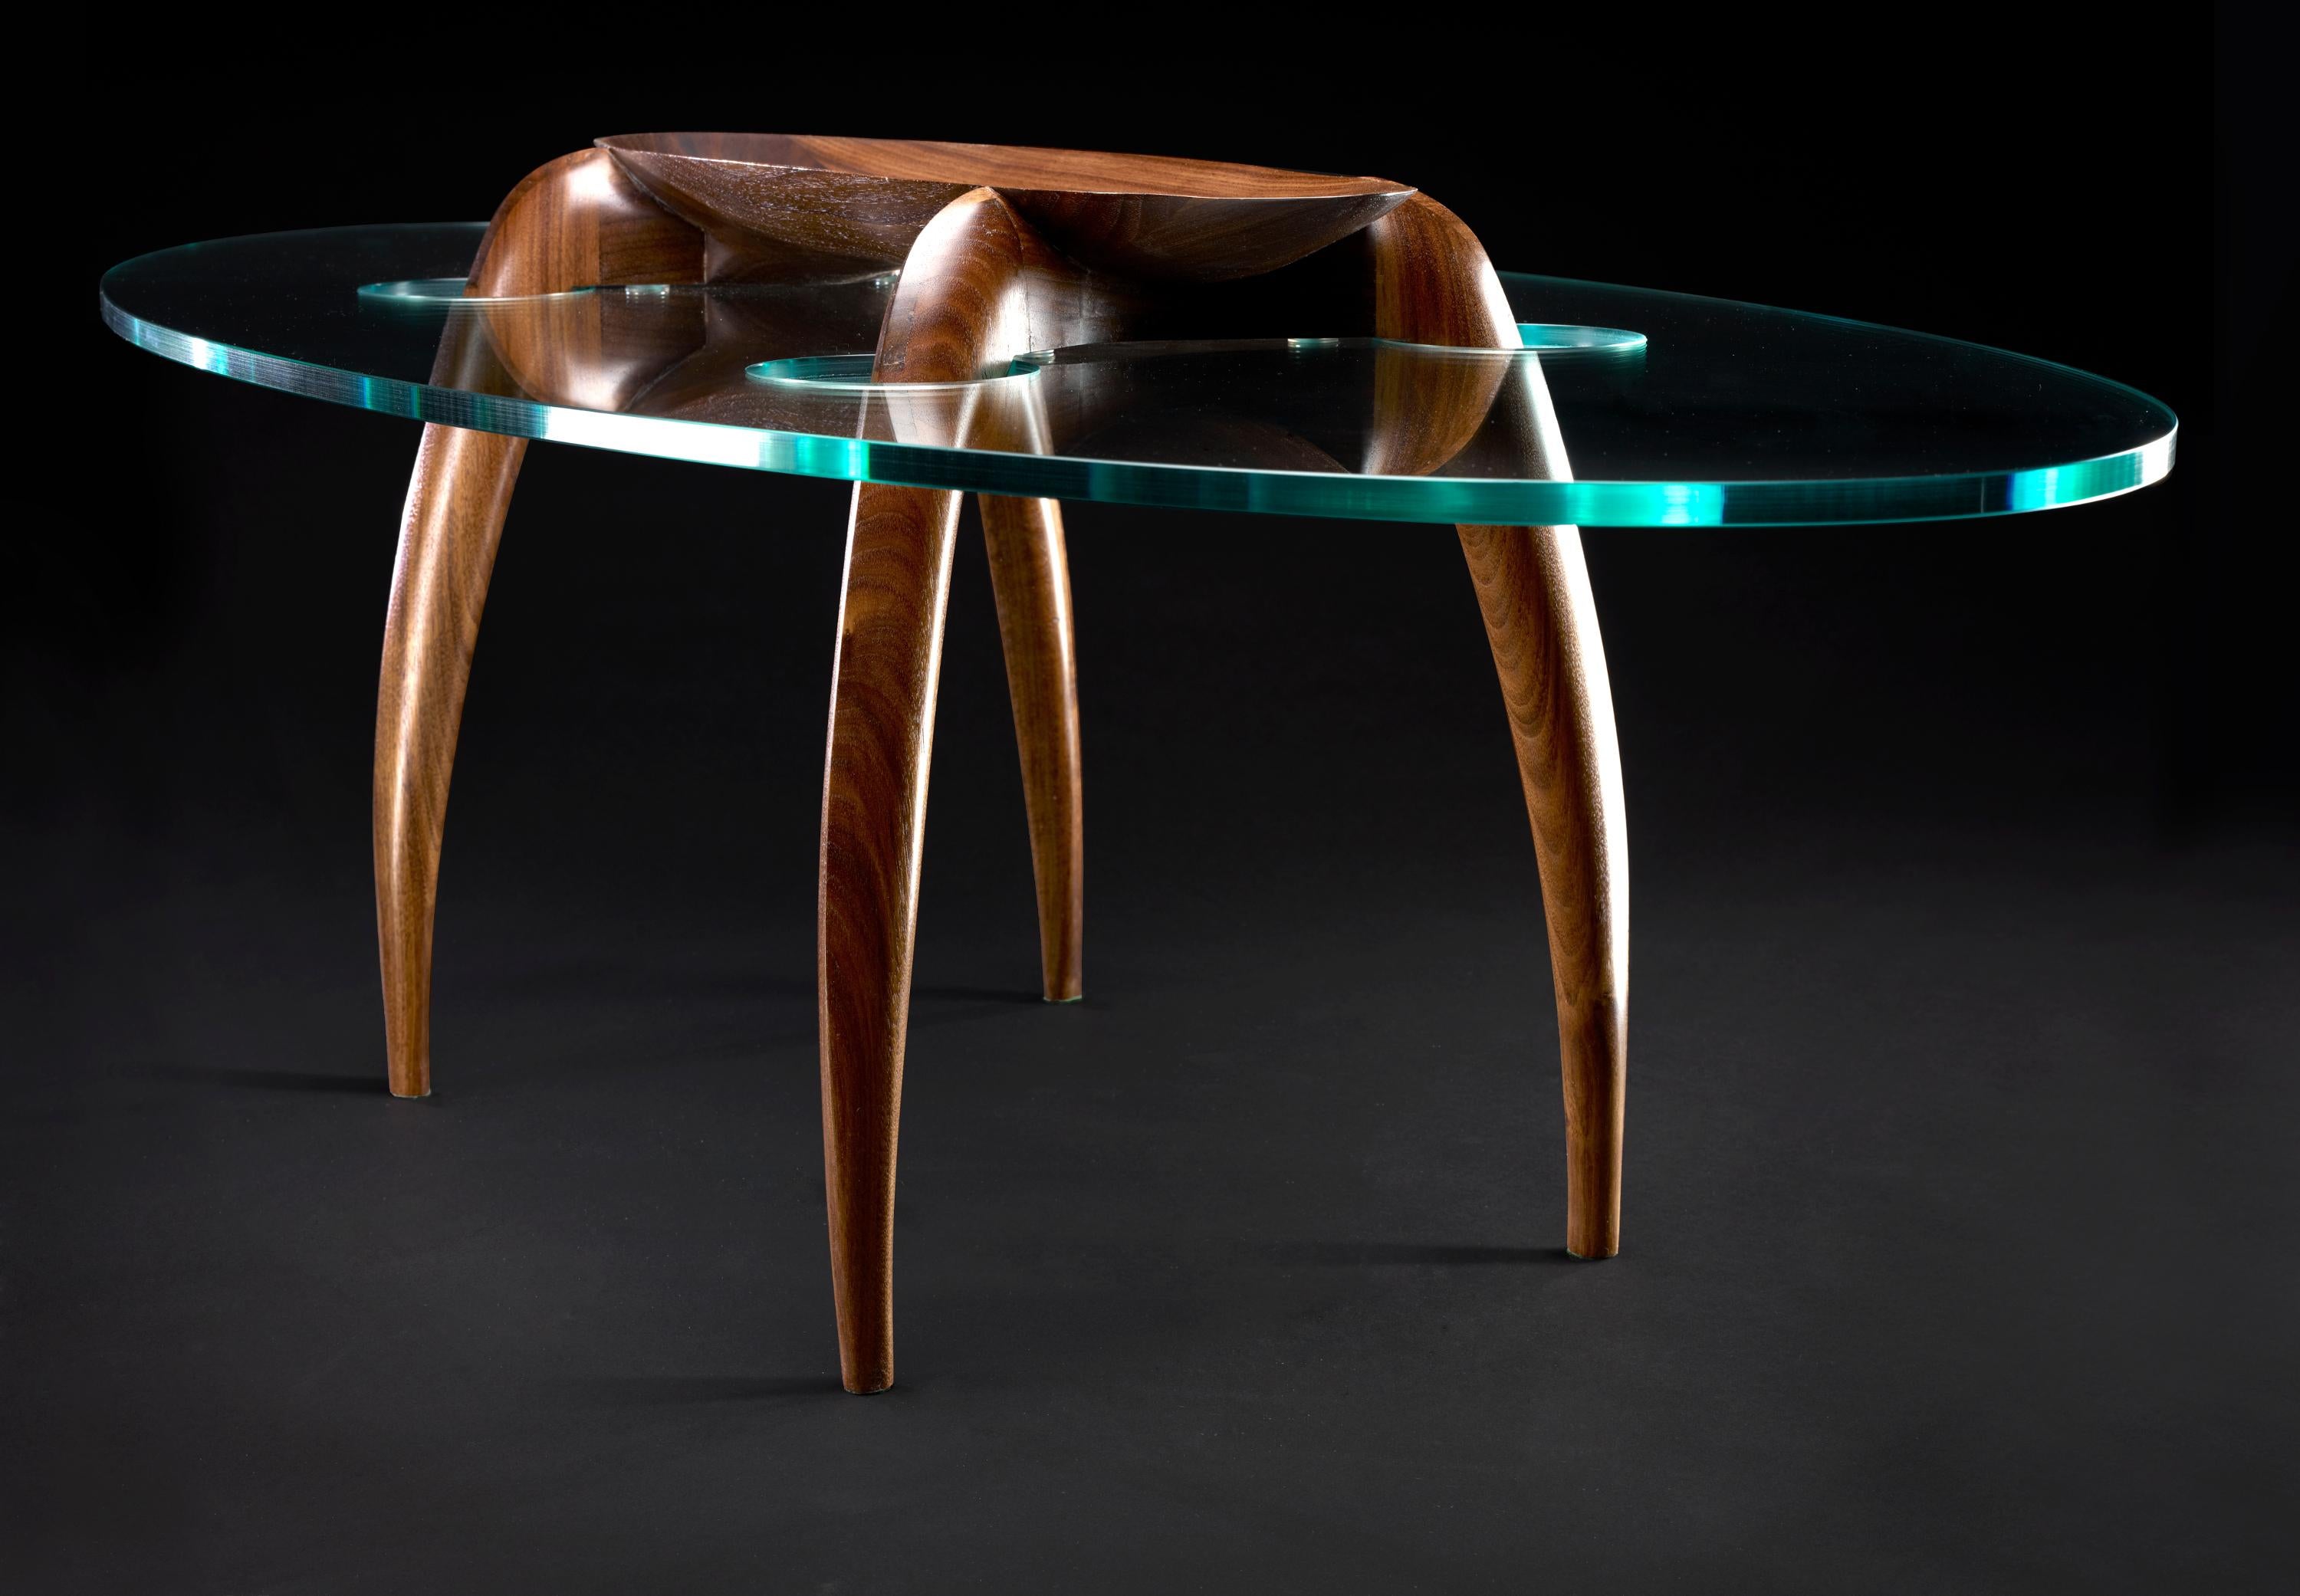 Pragmatism - Walnut Coffee Table Signed by Gildas Berthelot
Title: Vive le Pragmatisme
Material: Black Walnut, Glass
Dimensions: 49'' (L) 19'' (W) 13'' (H)
Signed by Gildas Berthelot

Gildas Berthelot has forged for more than 30 years a